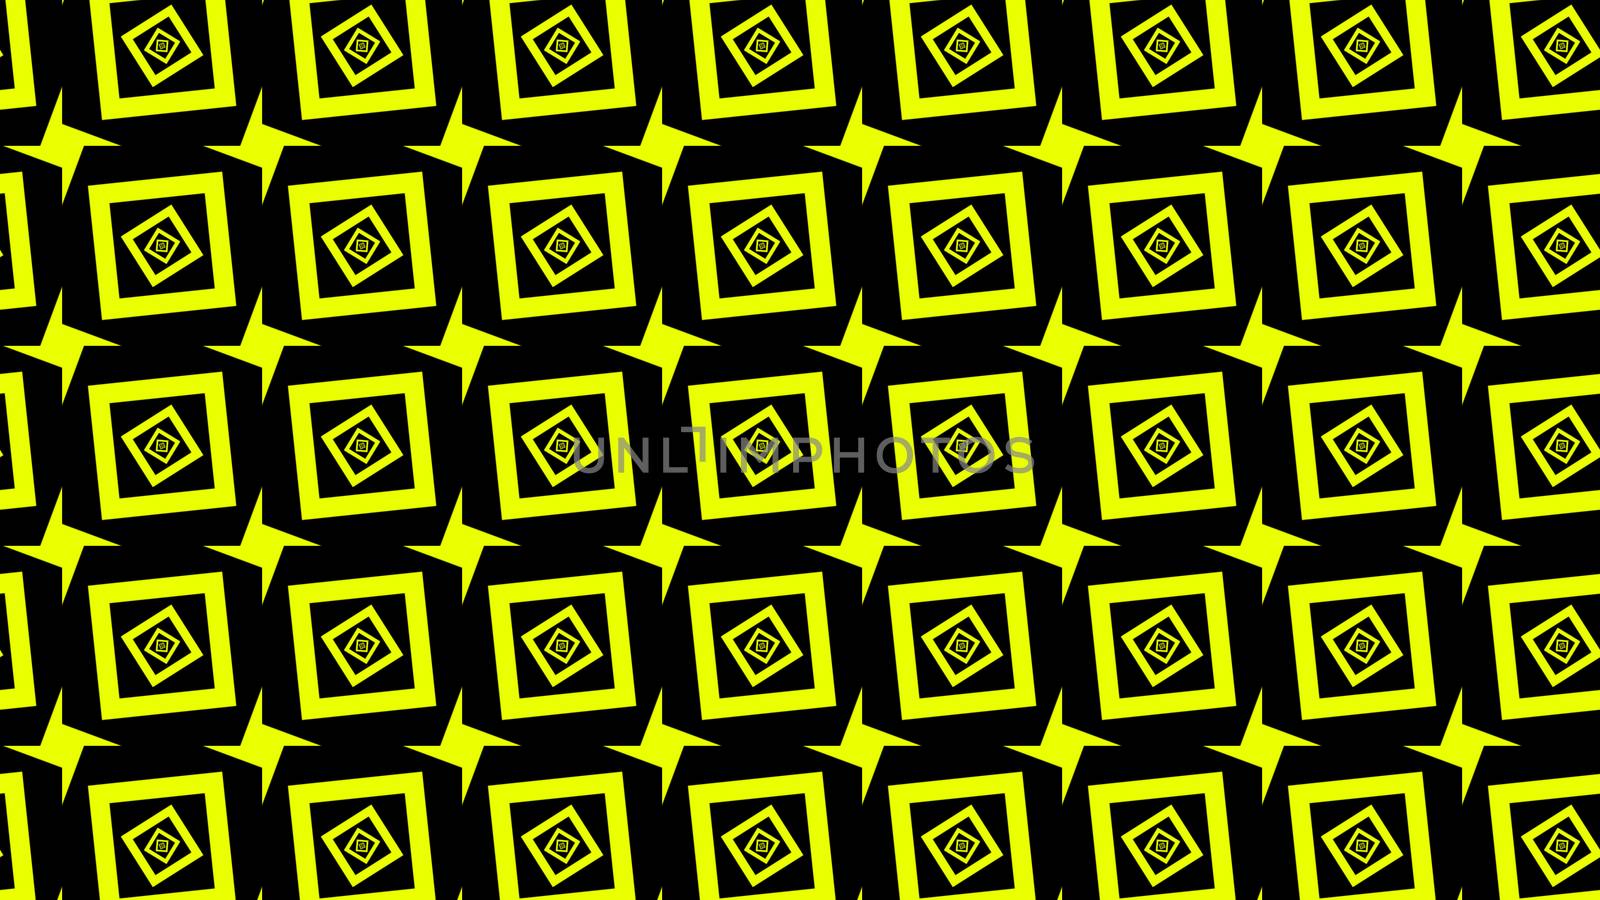 Yellow squares illusion in black backdrop by klss